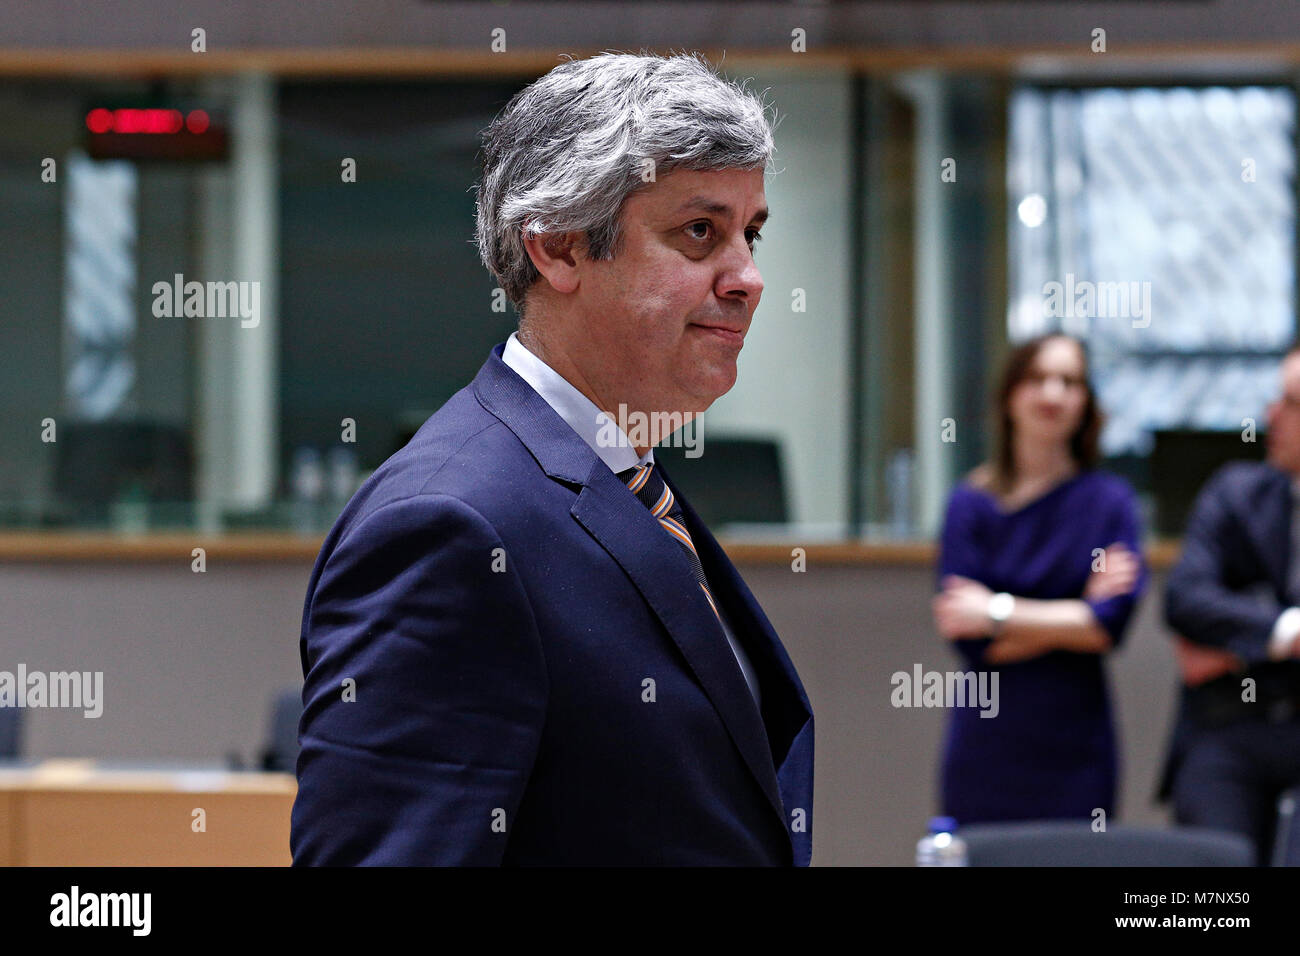 Brussels, Belgium. 12th March, 2018. Mario Centeno , President of the Eurogroup attends an Eurogroup meeting at the EU headquarters in Brussels, Belgium on March 12, 2018. Alexandros Michailidis/Alamy Live News Stock Photo